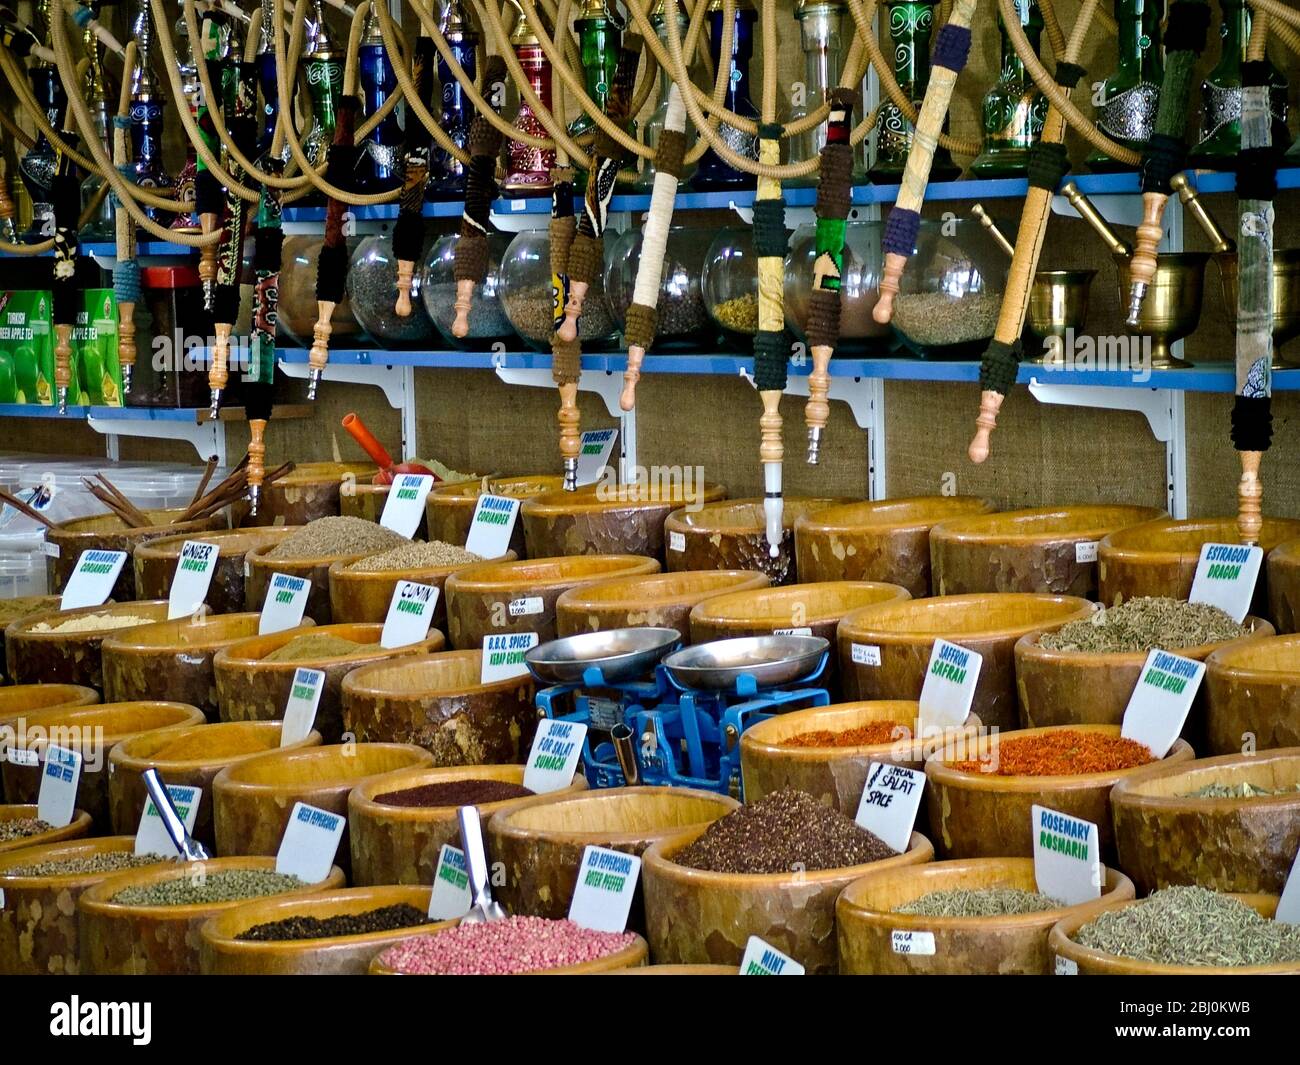 Bowls of spices and hookah pipes for sale in shop on waterfront at resort town of Dalyan, southern Turkey - Stock Photo